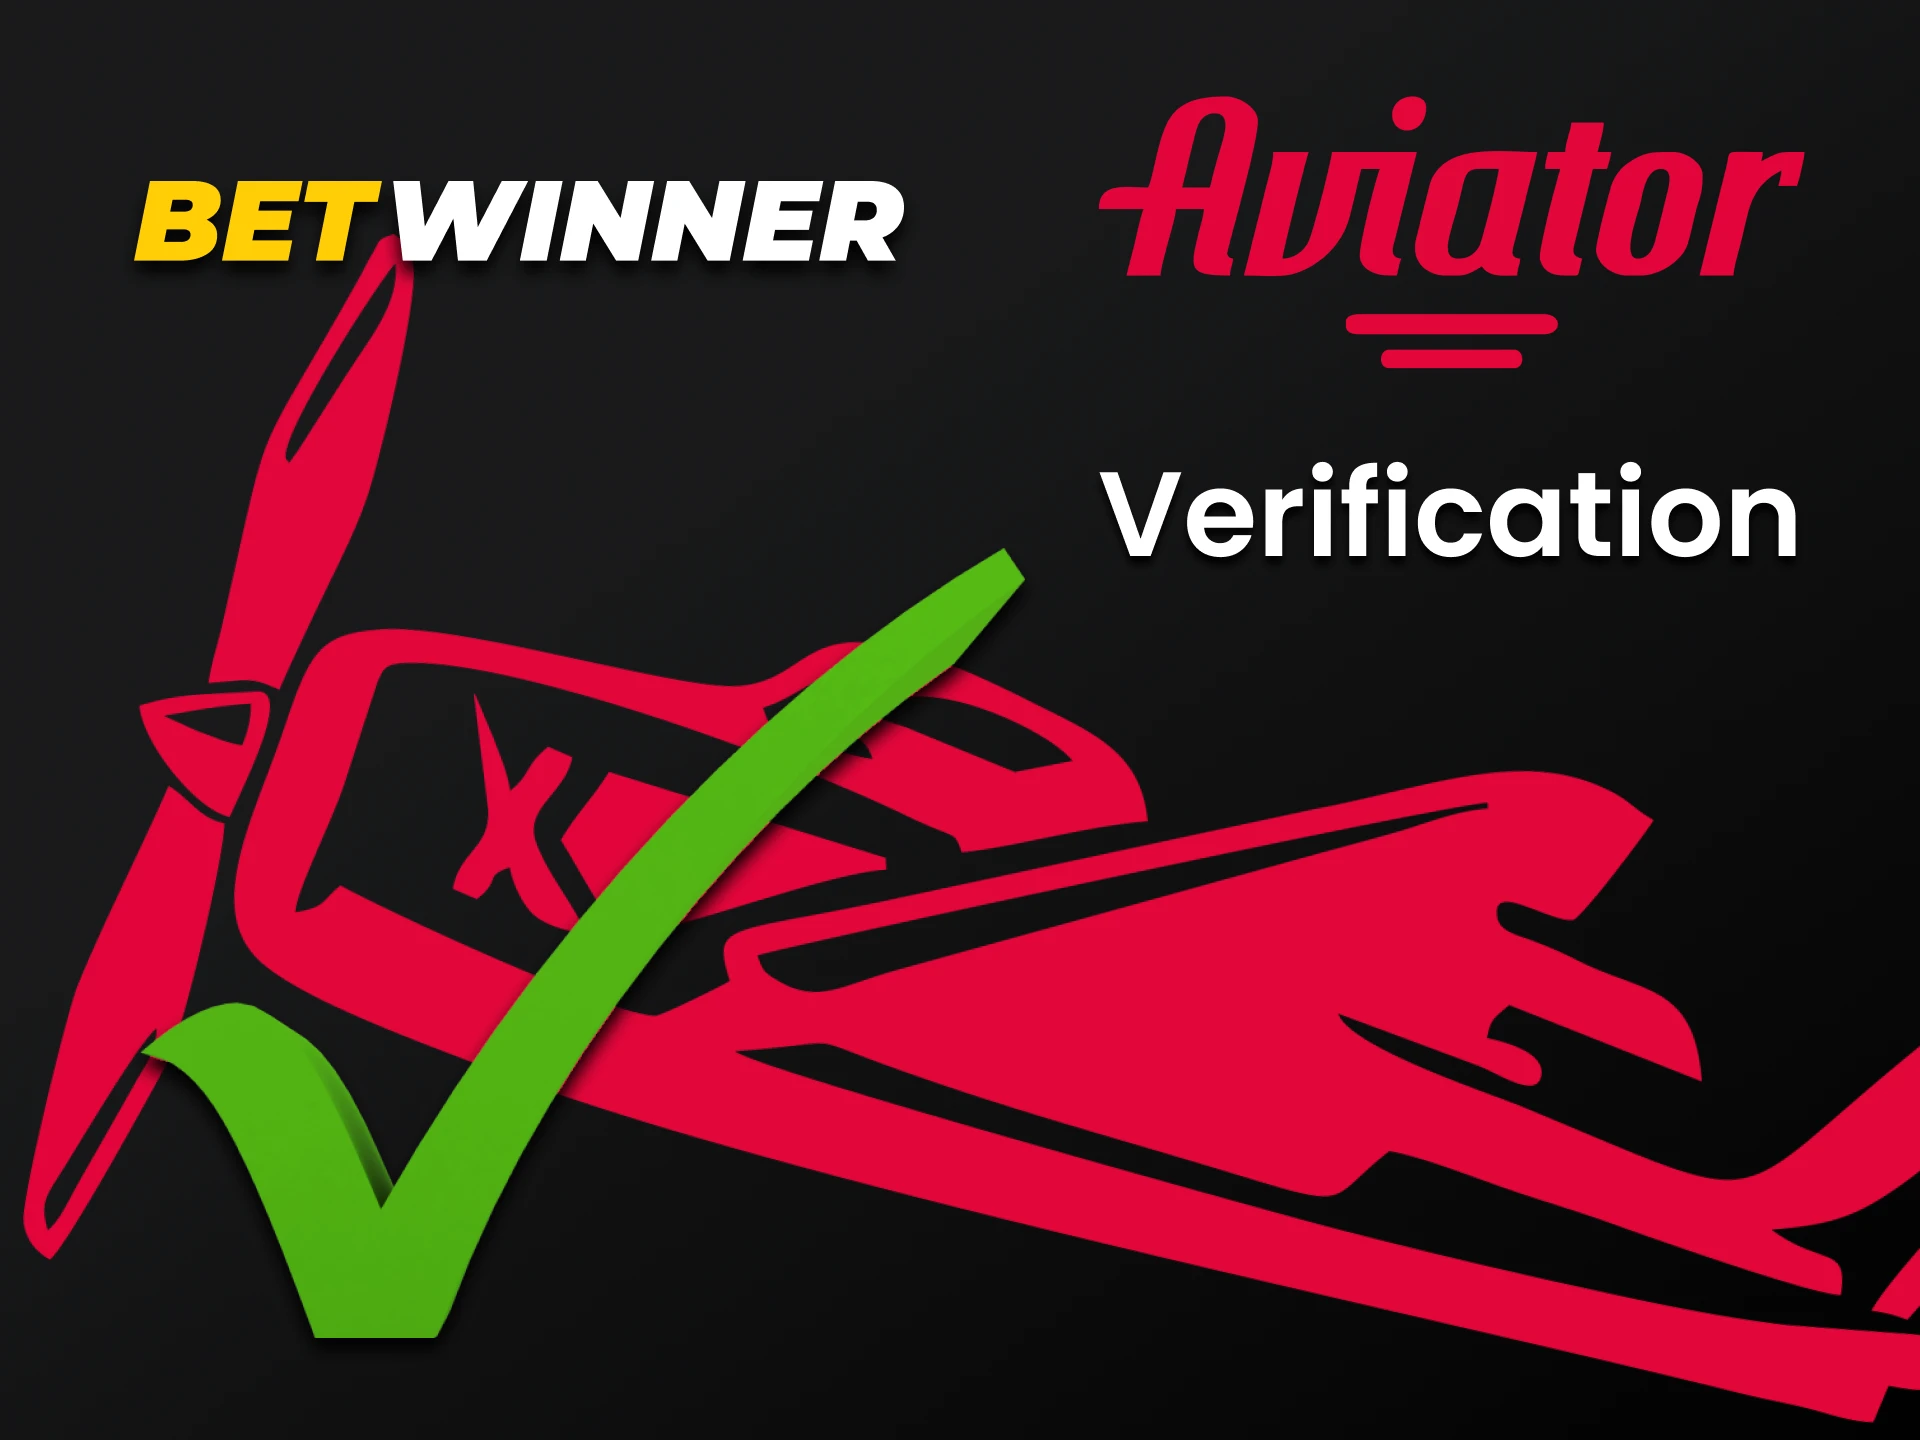 Fill in the necessary data on Betwinner to play Aviator.